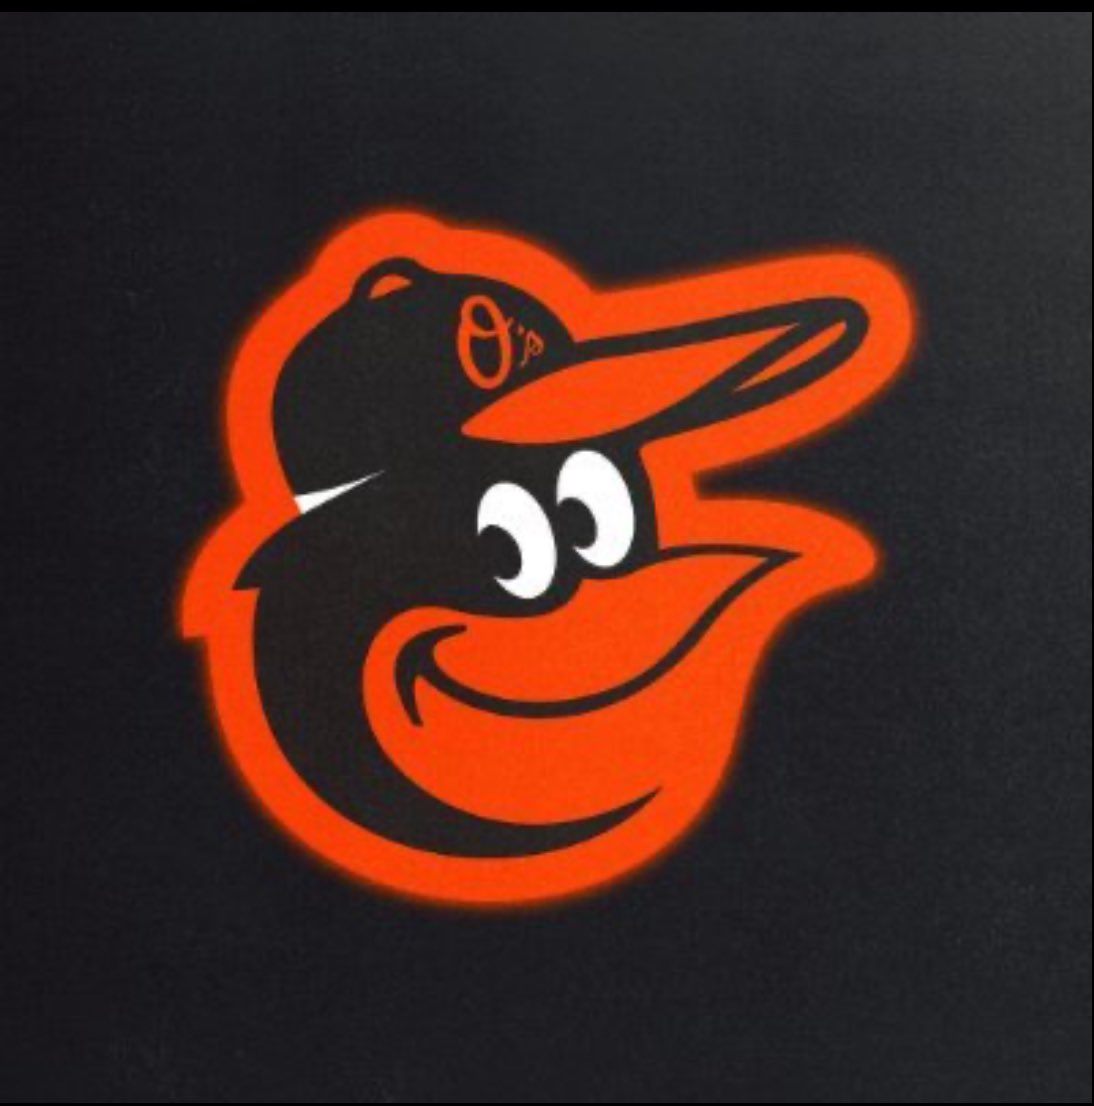 What say you #Birdland @Orioles bring out the 🧹 and sweep the #Reds …… #Orioles now 23-11 best record in the AL…. Pitching is on 🔥 and the offense breaks out in a big way today with 11 runs! Day off tomorrow see you in DC on Tuesday! #LetsGeauxOs